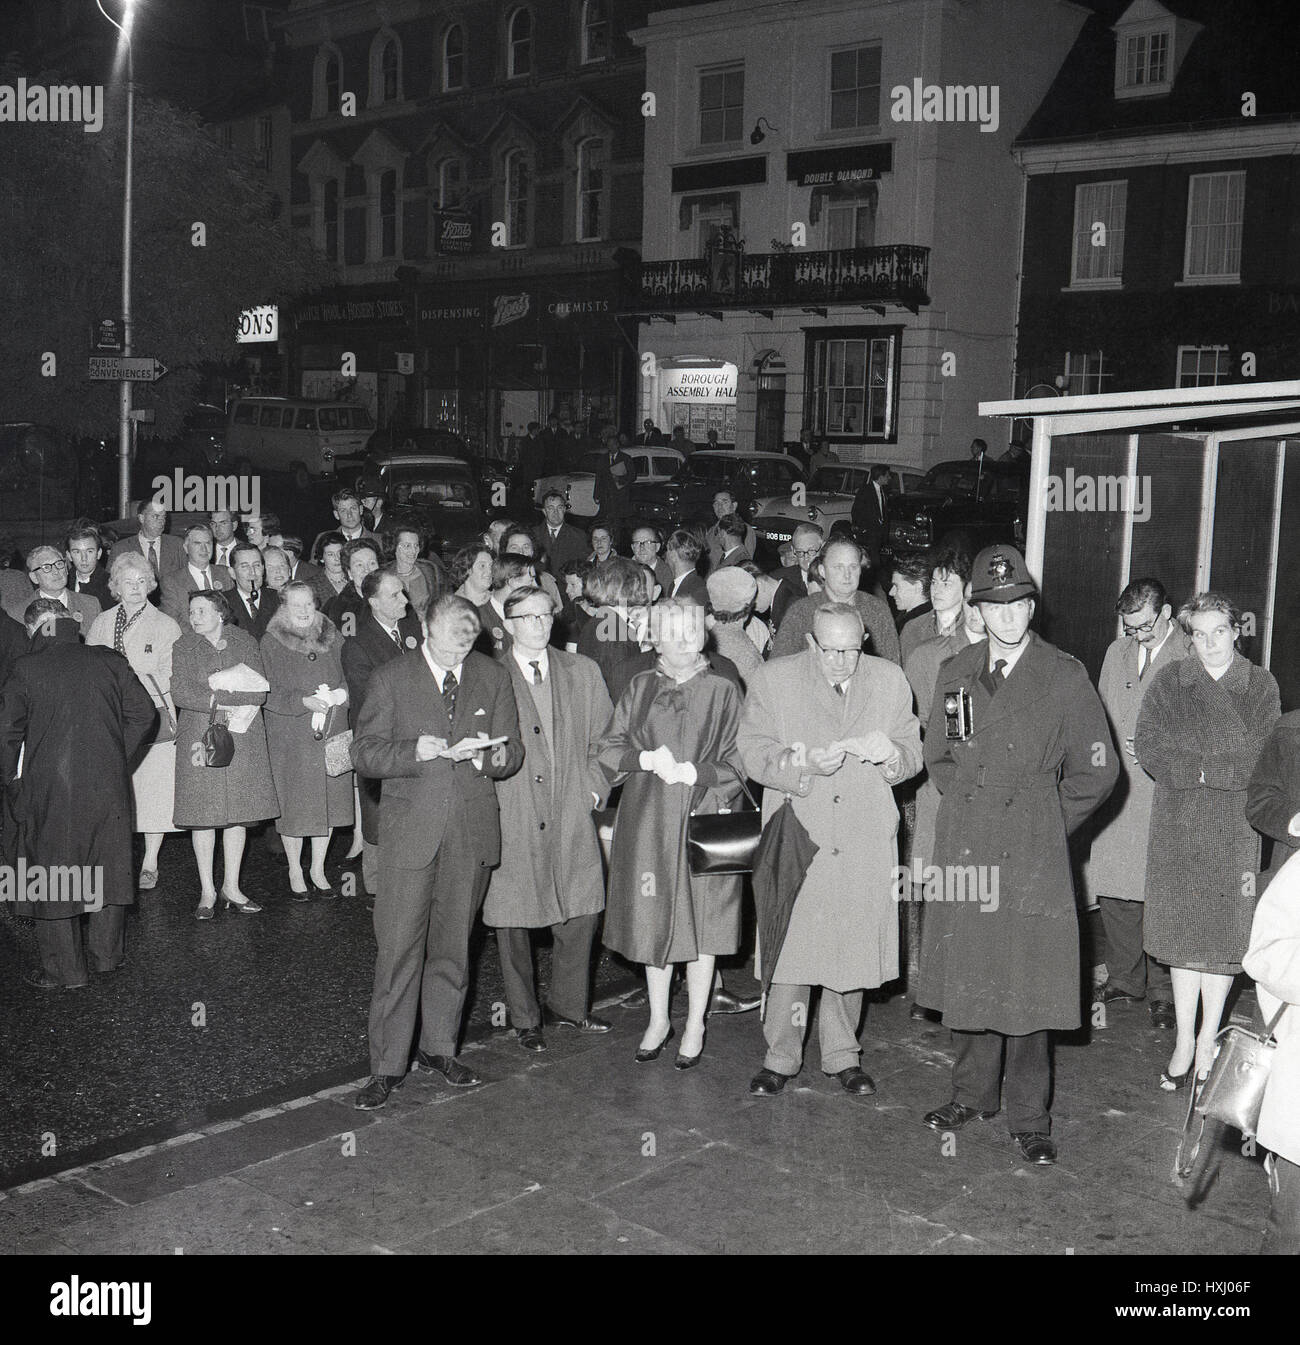 1960s, historical, evening time and people wait in high street, Aylesbury for the result of constituency vote in the British General election, England. Stock Photo